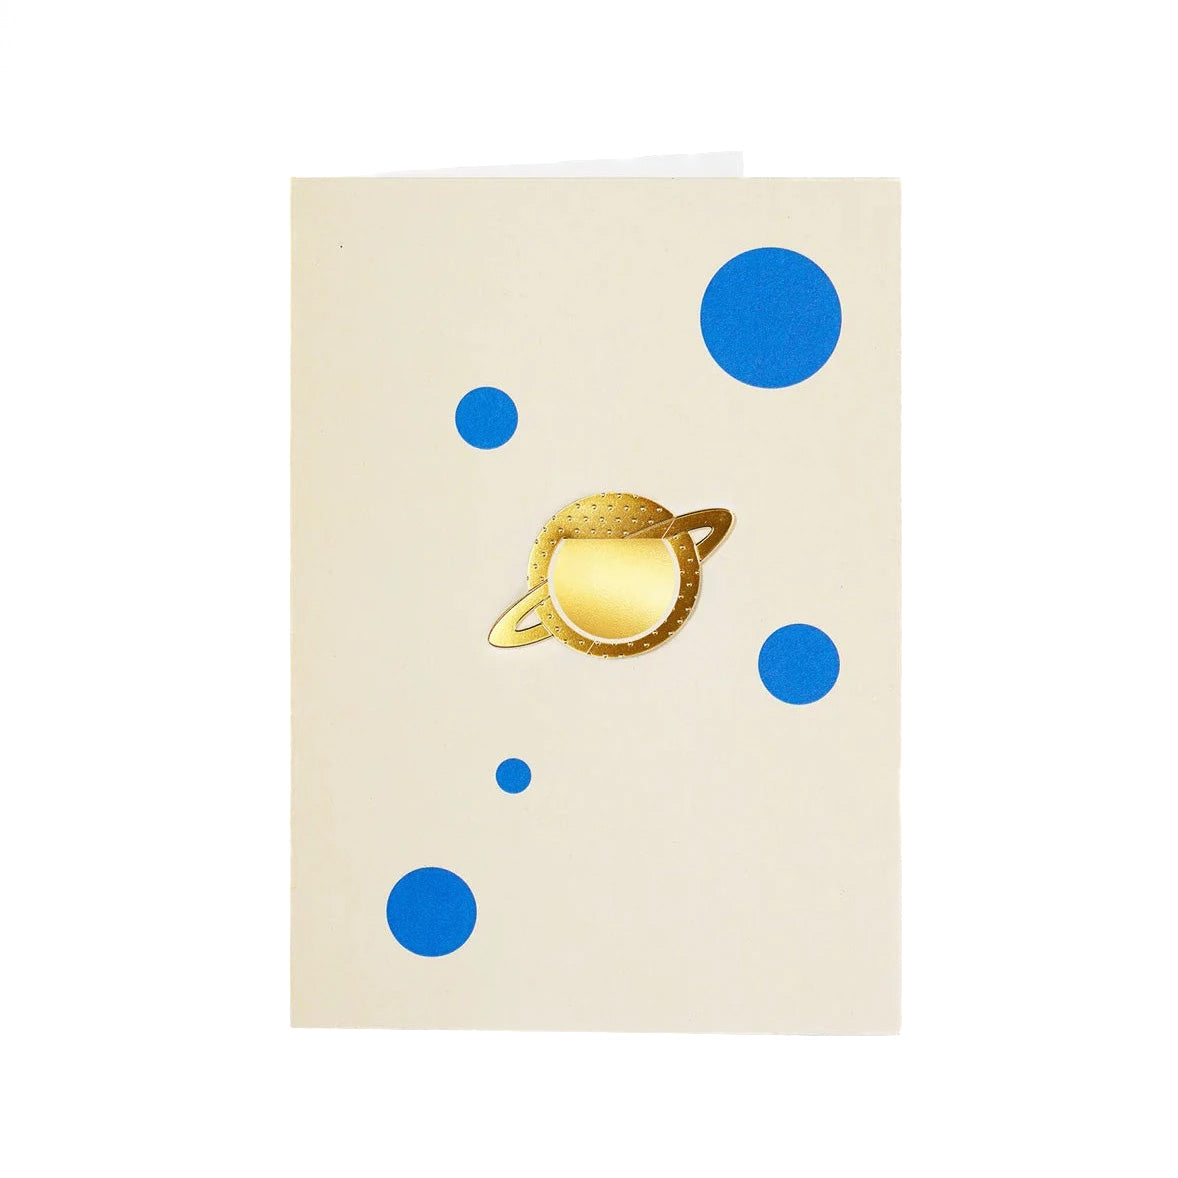 Greeting card with a gold metallic planet and blue polka dots design